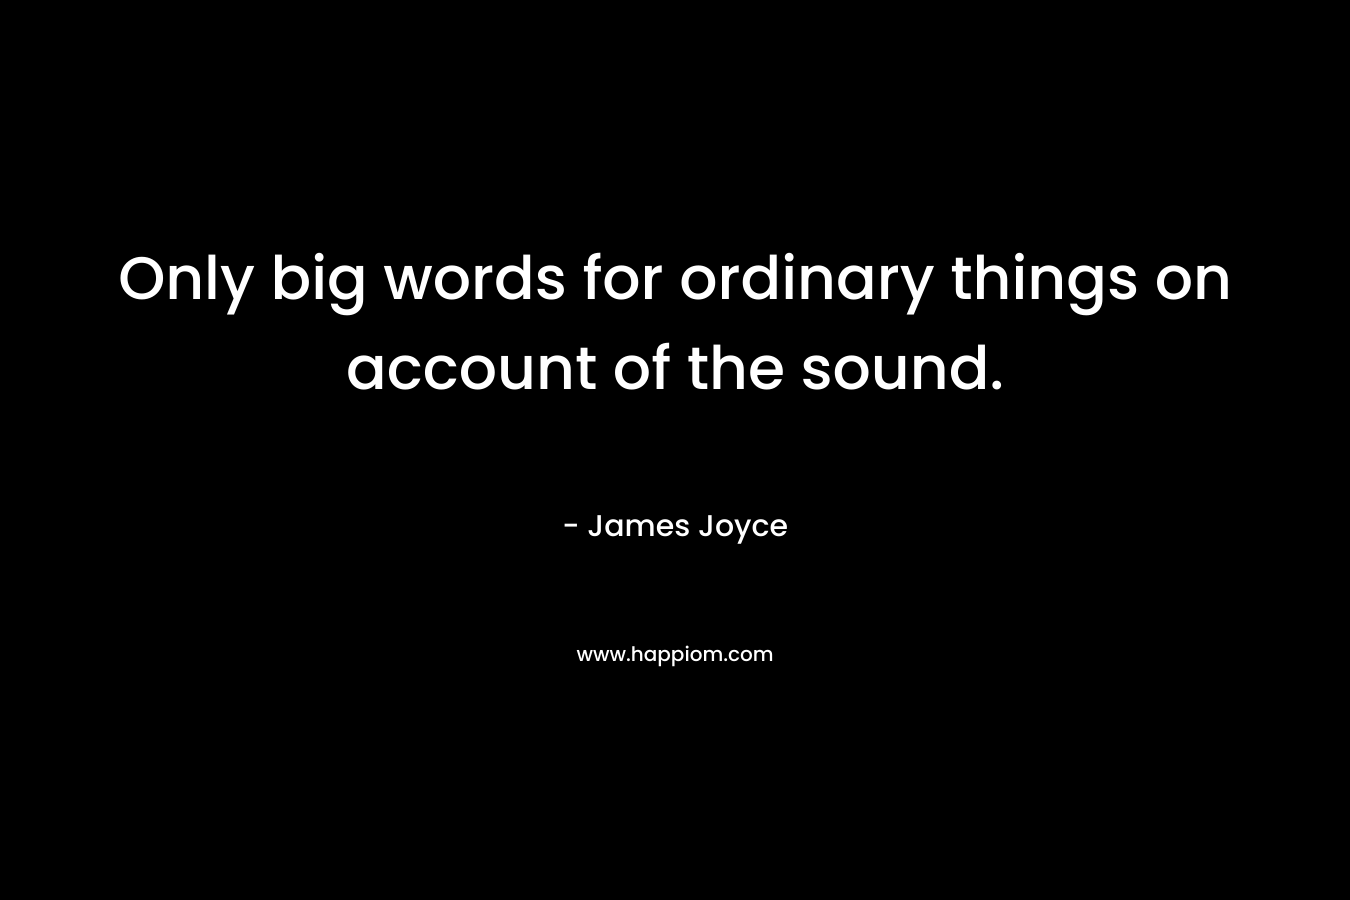 Only big words for ordinary things on account of the sound. – James Joyce